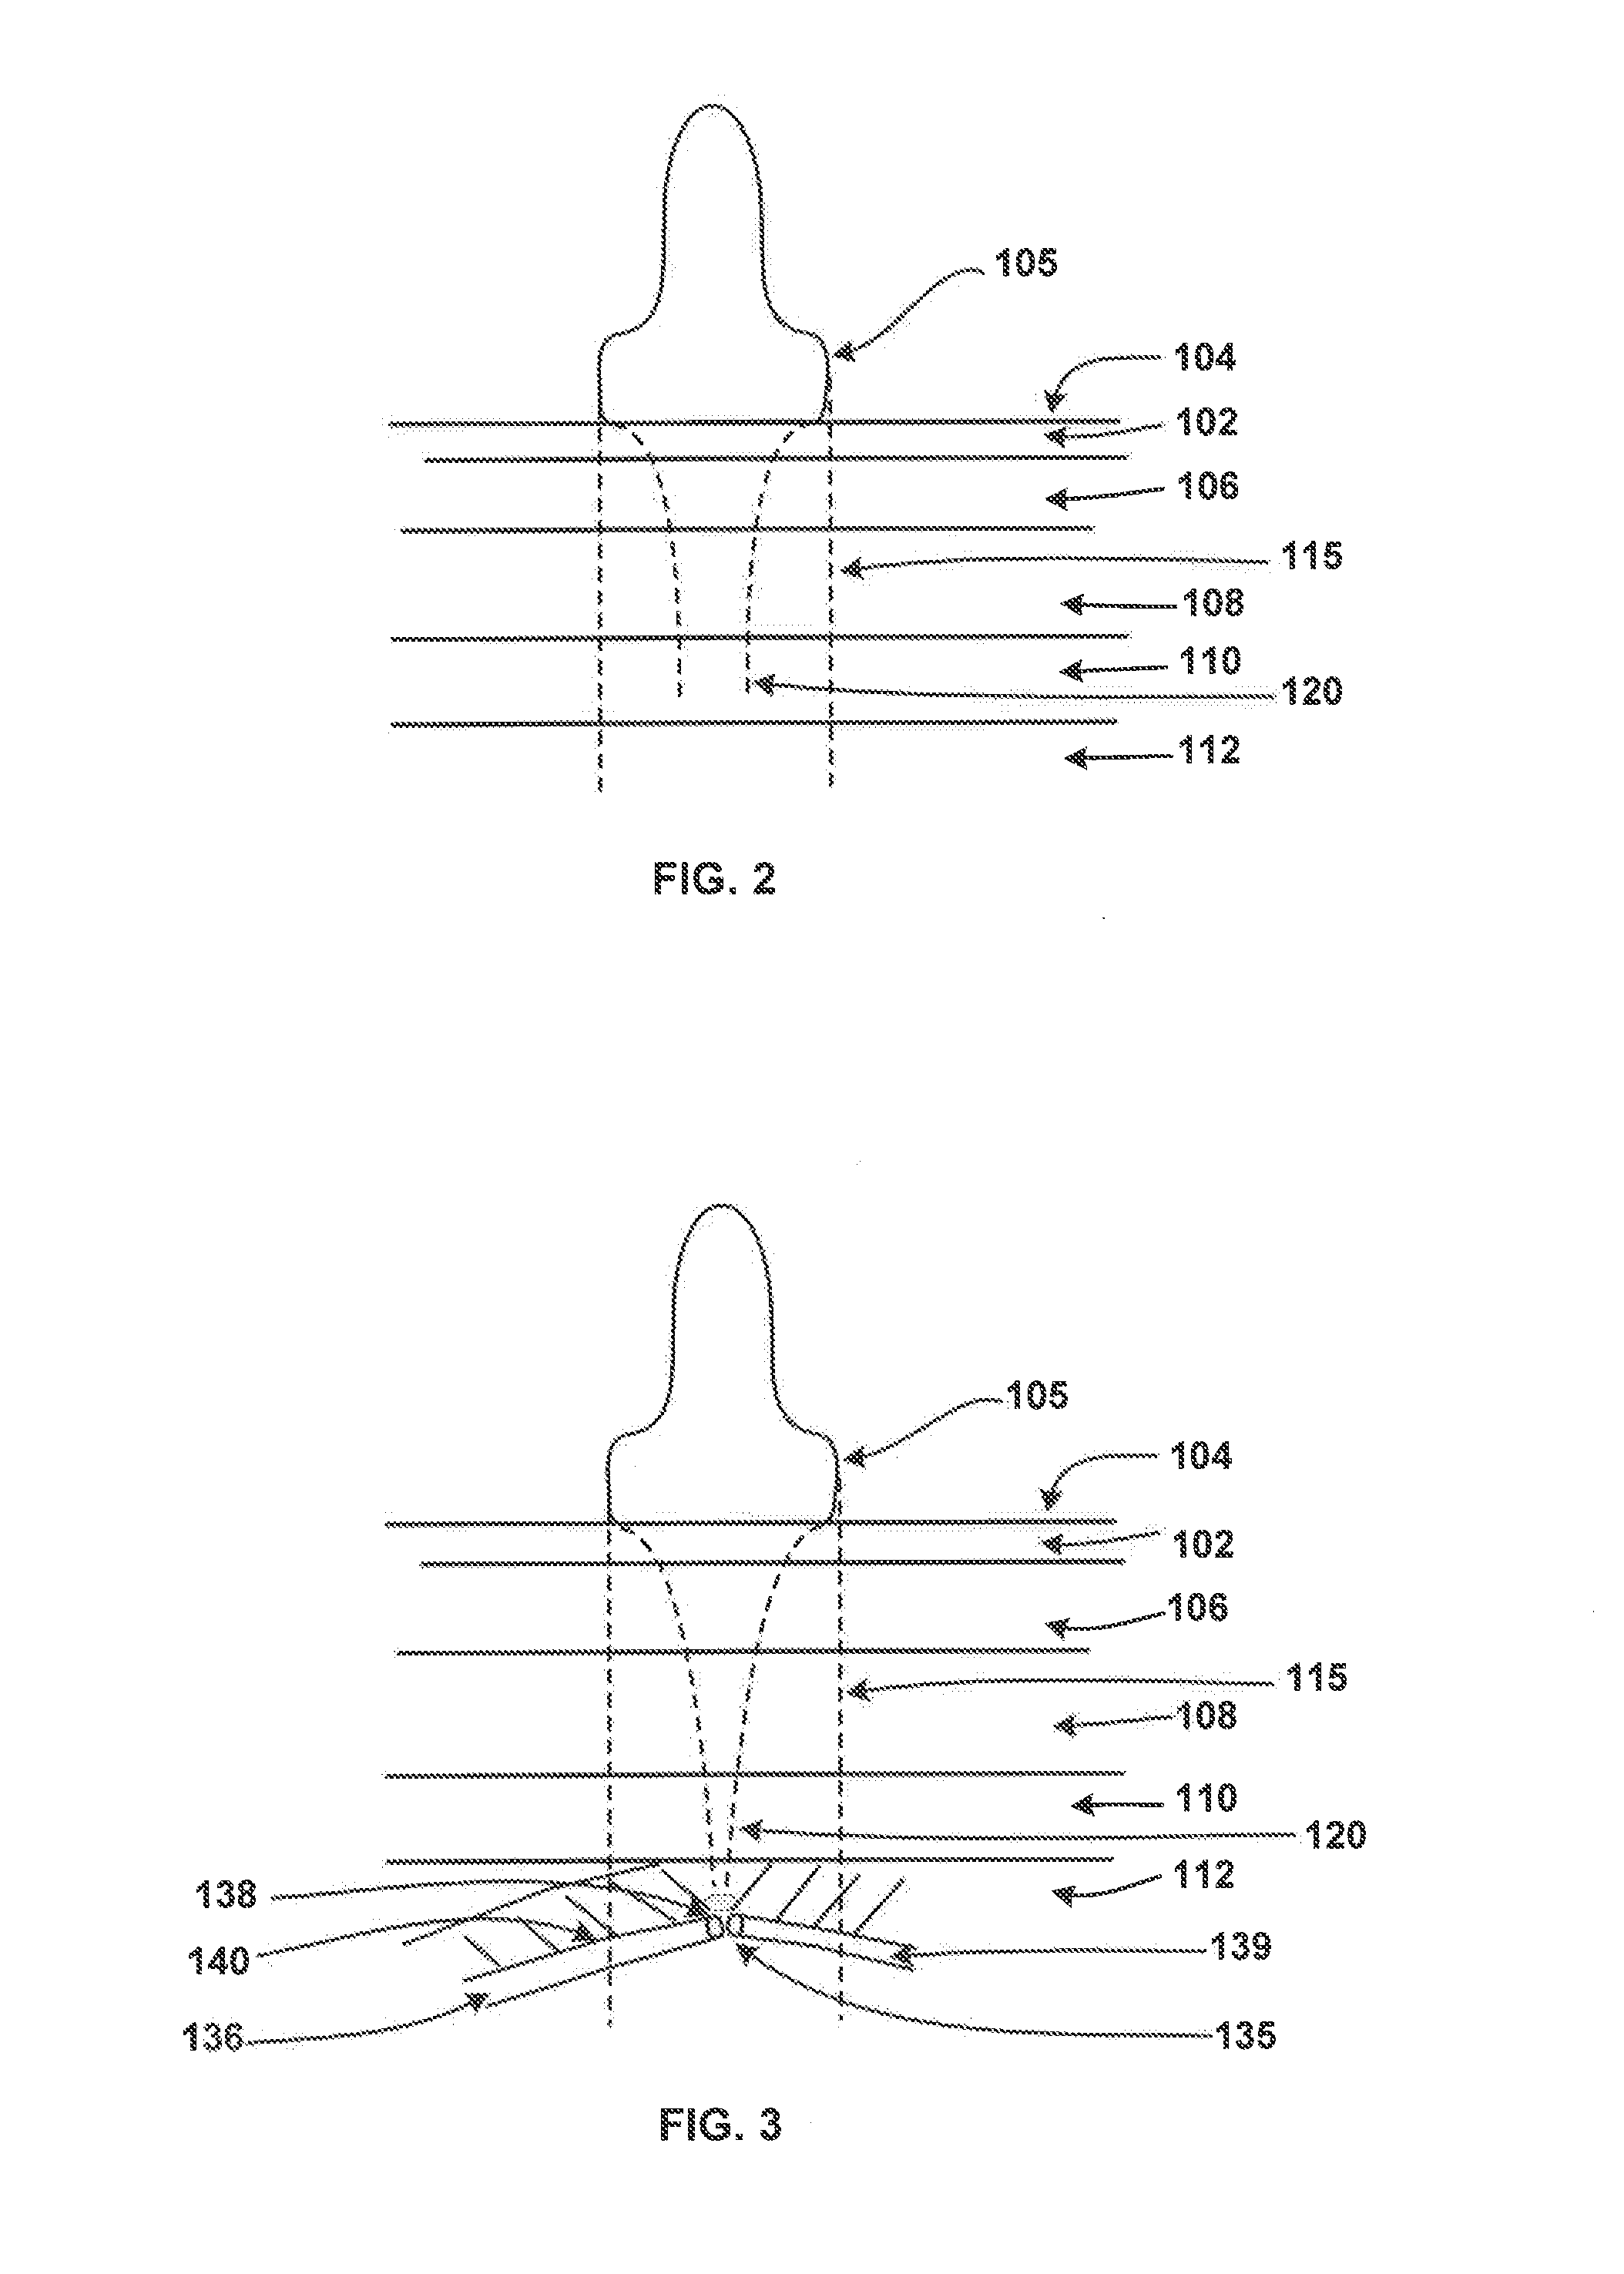 System and Method for Treating Cartilage and Injuries to Joints and Connective Tissue